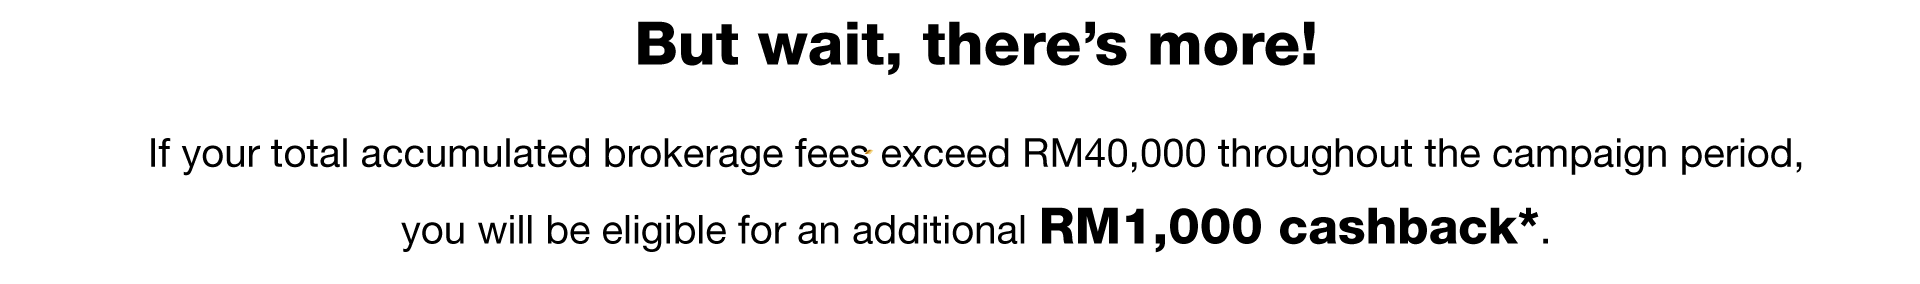 But wait, there’s more! If your total accumulated brokerage fees exceed RM40,000 throughout the campaign period, you will be eligible for an additional RM1,000 cashback*